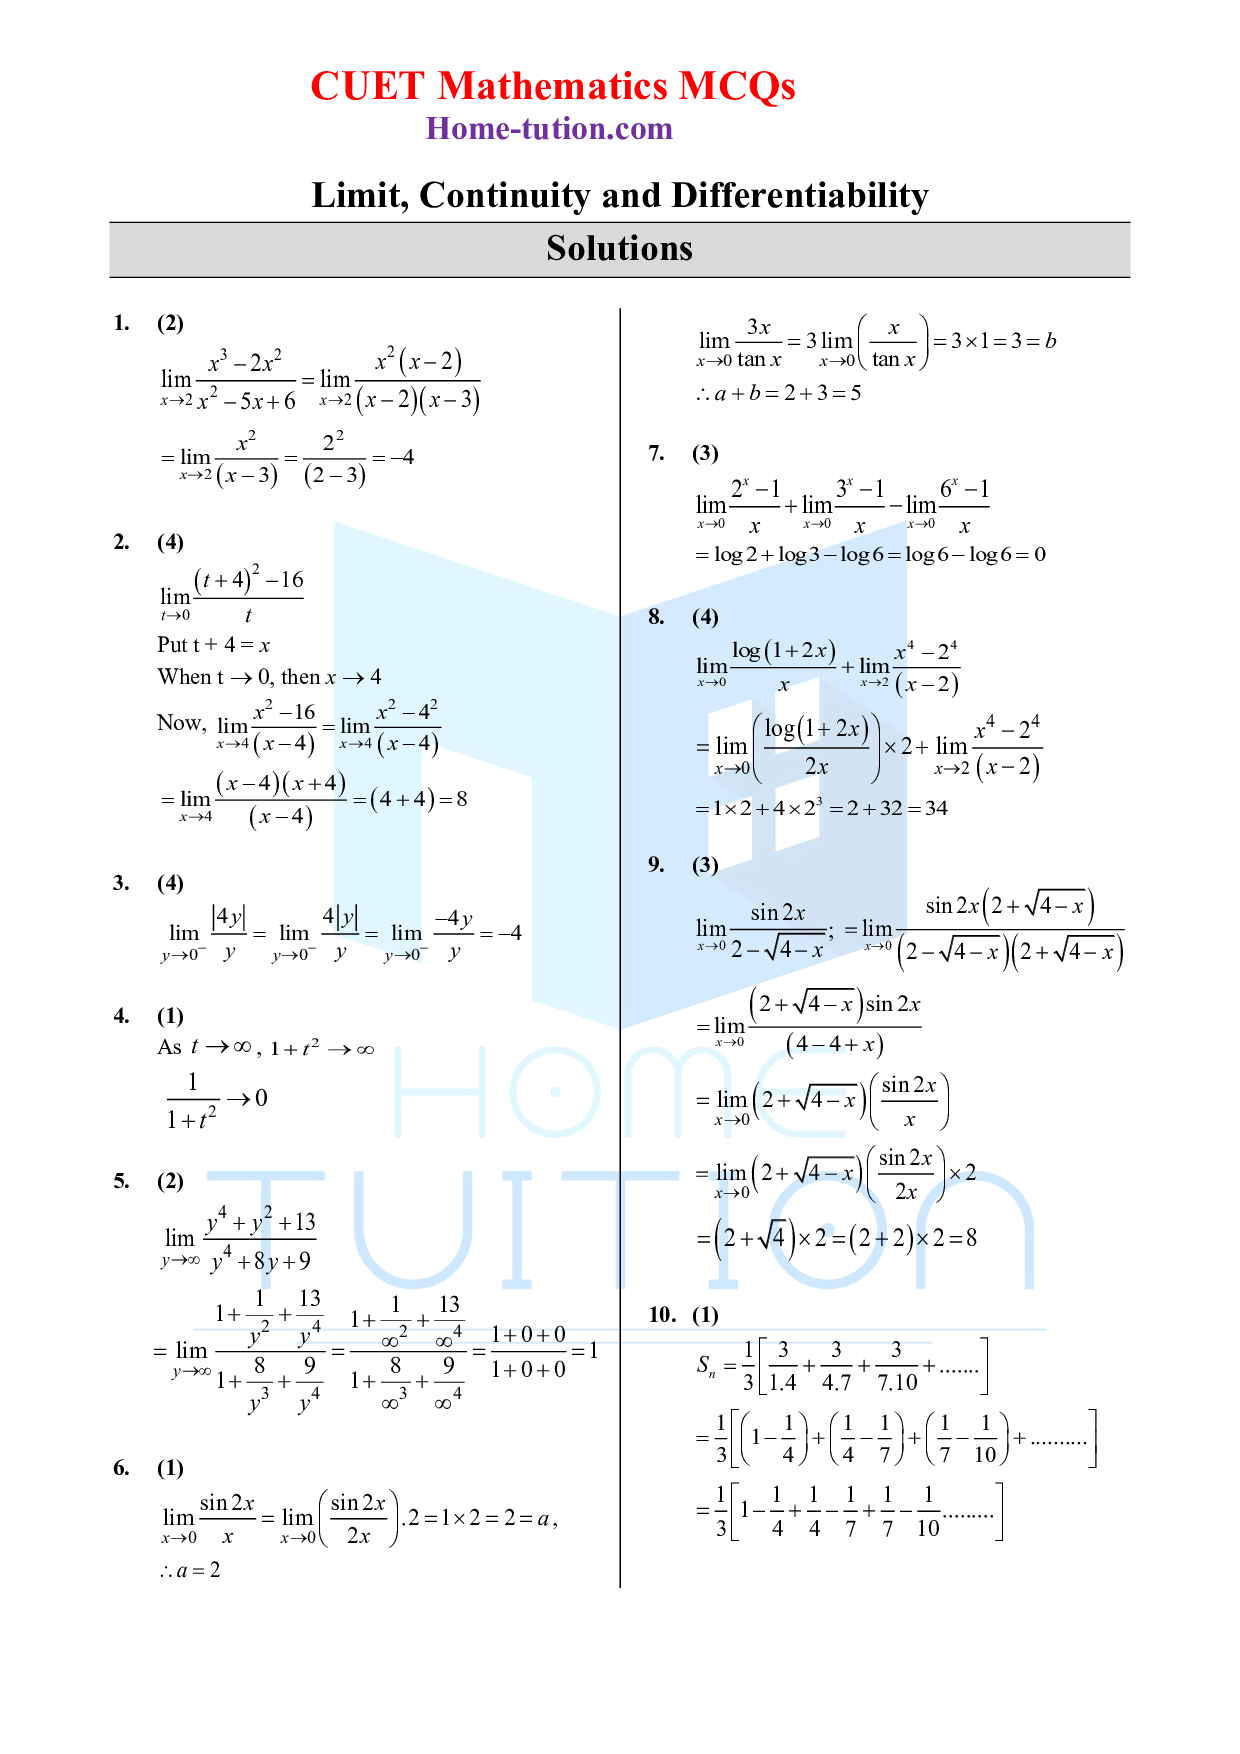 CUET MCQ Questions For Maths Chapter-8 Limit, Continuity and Differentiability